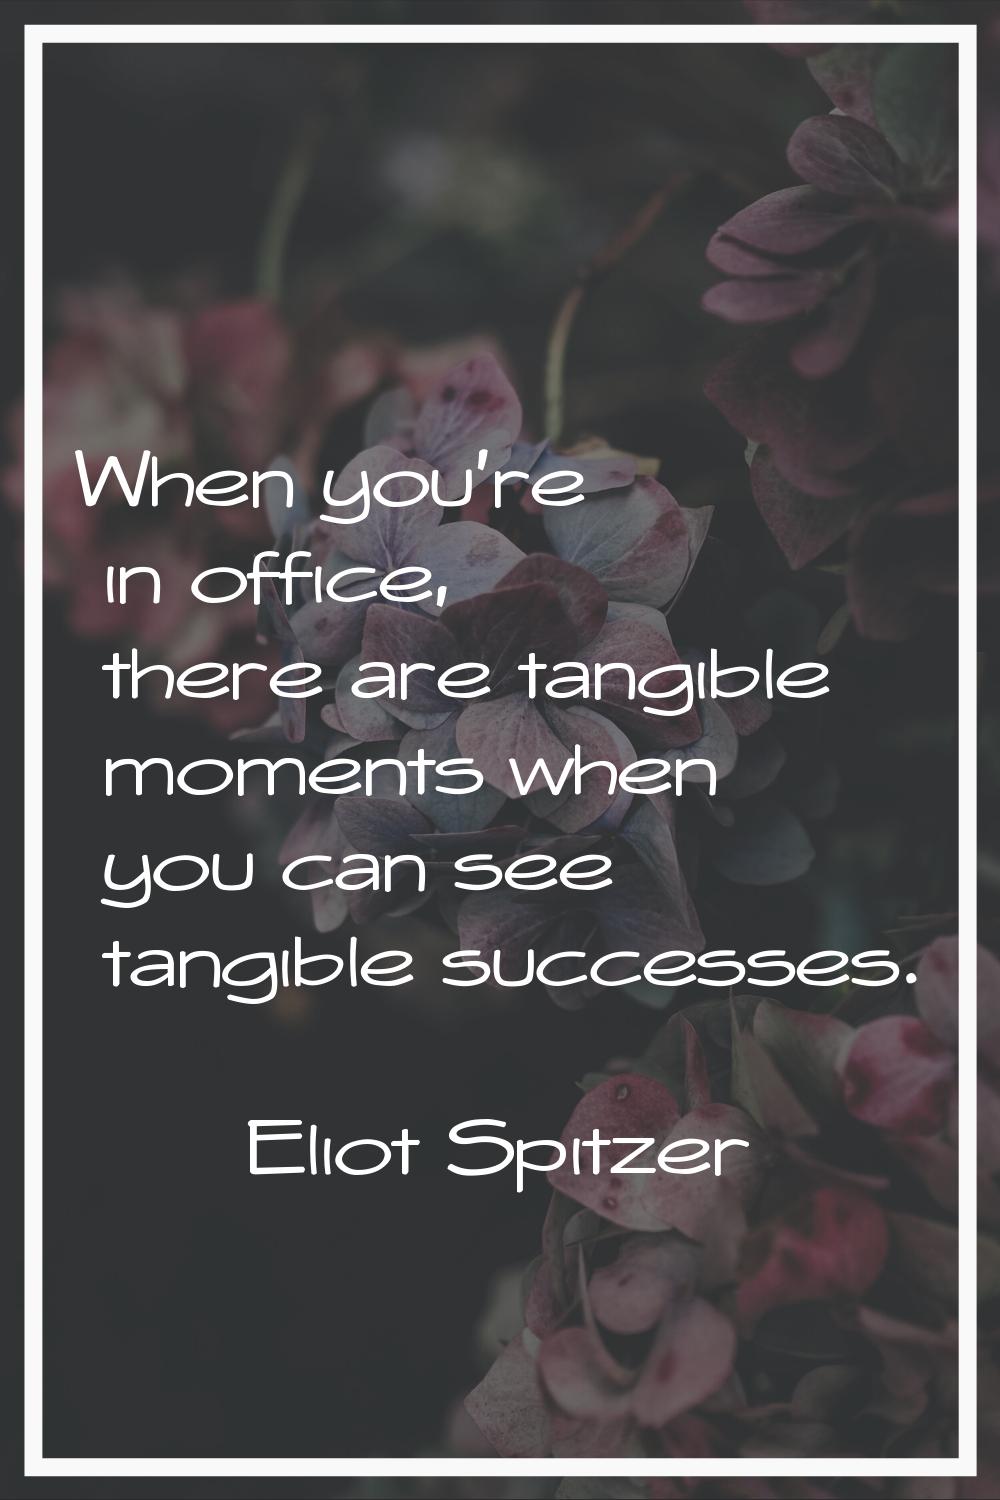 When you're in office, there are tangible moments when you can see tangible successes.